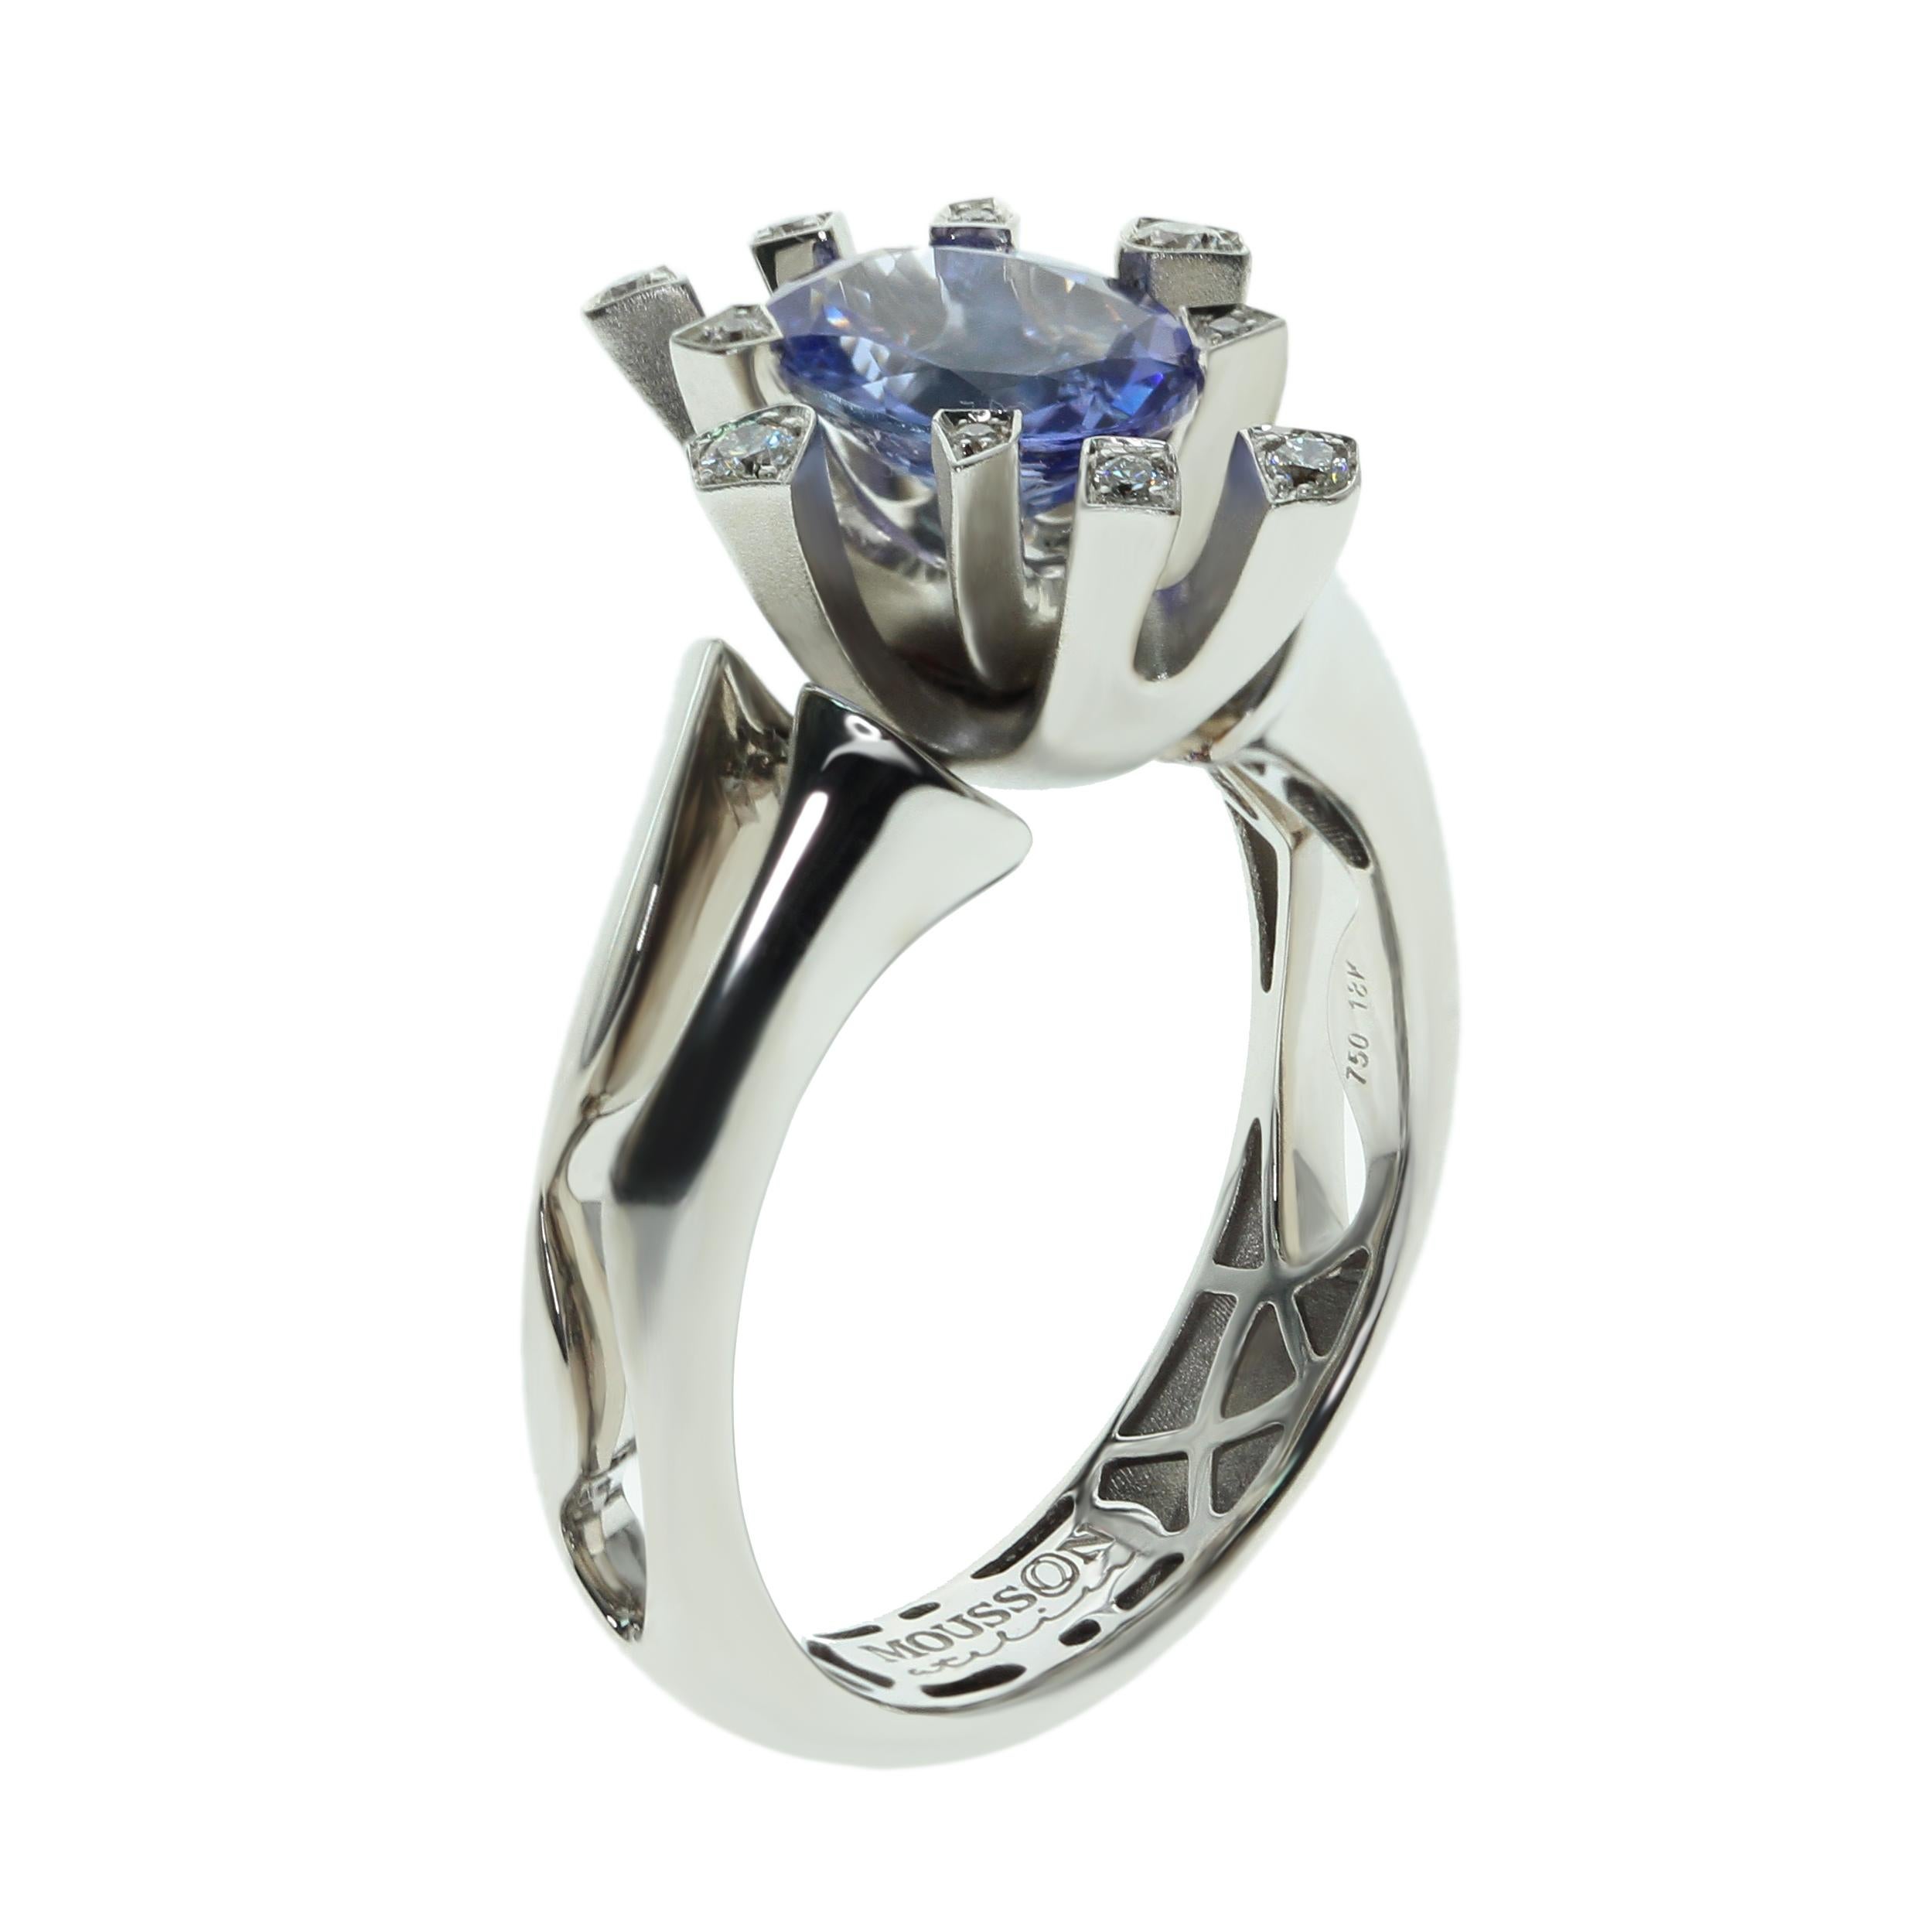 Tanzanite Diamonds 18 Karat White Gold Snowflake Ring
Why snowflake? Look at the unique Ring design, reminiscent of the cold beauty of winter. Shank of Ring is made in glossy 18K White Gold, it seems to have cracked on its sides, which express the